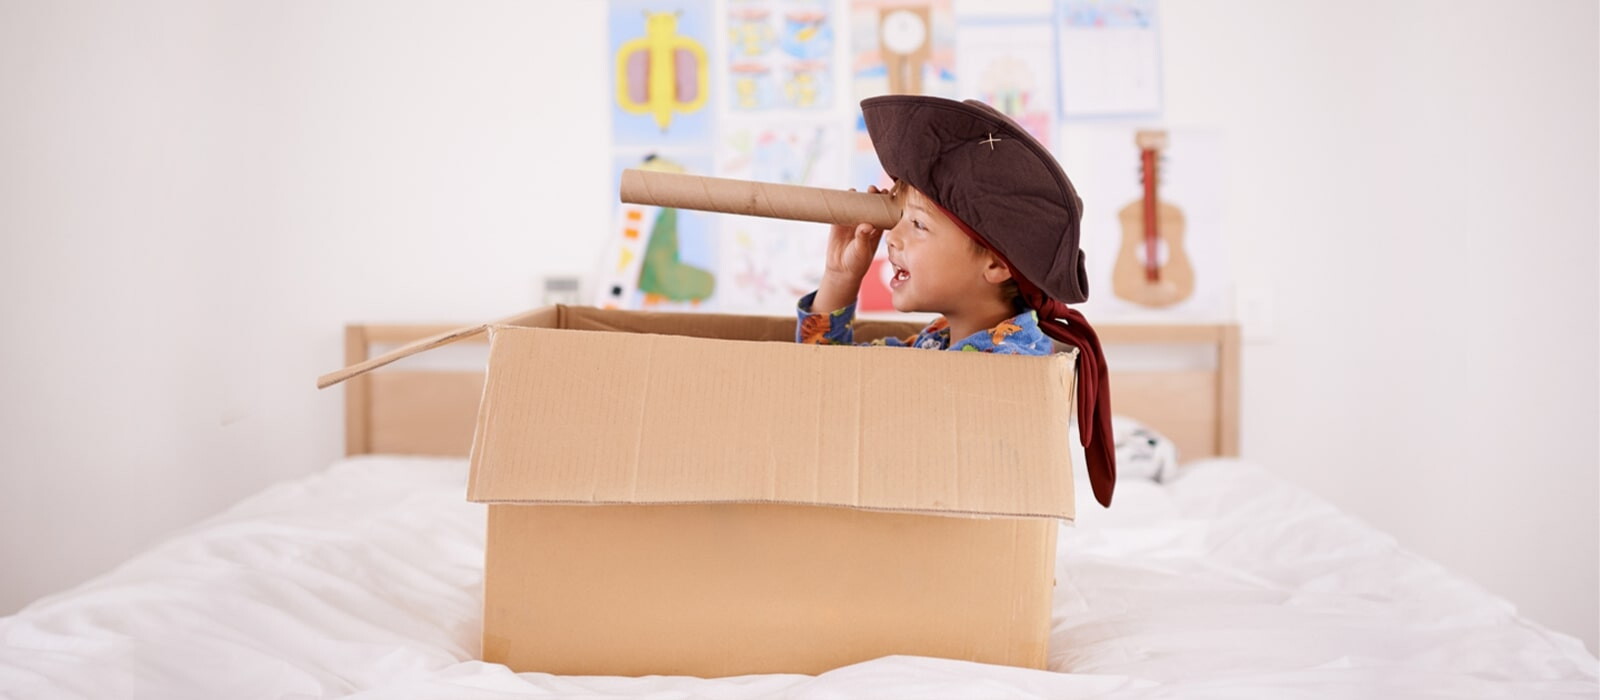 boy with pirate costume in a box